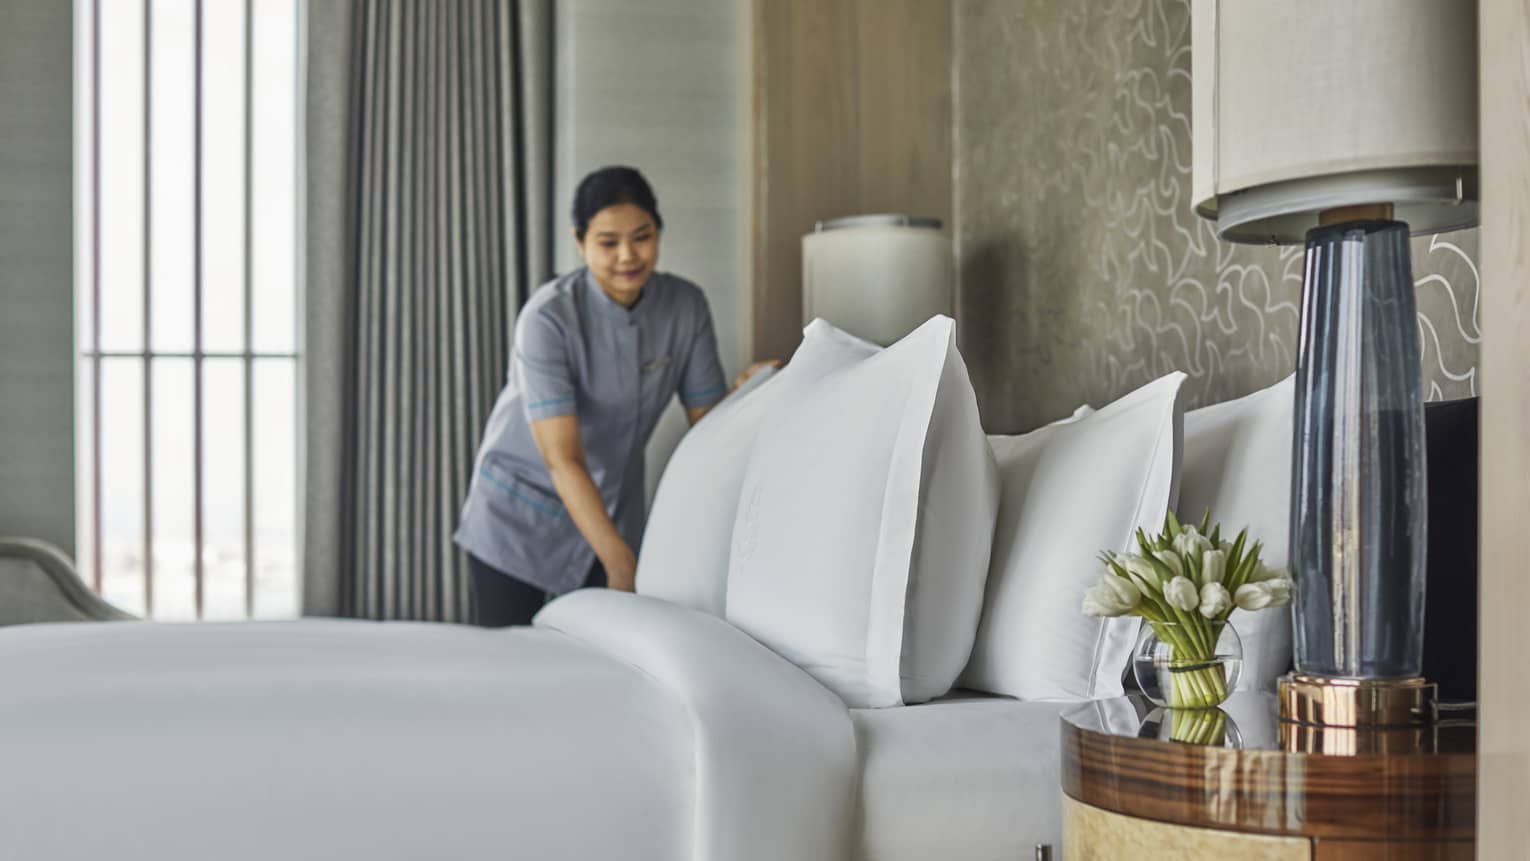 A room service attendant fluffing pillows on a freshly made bed